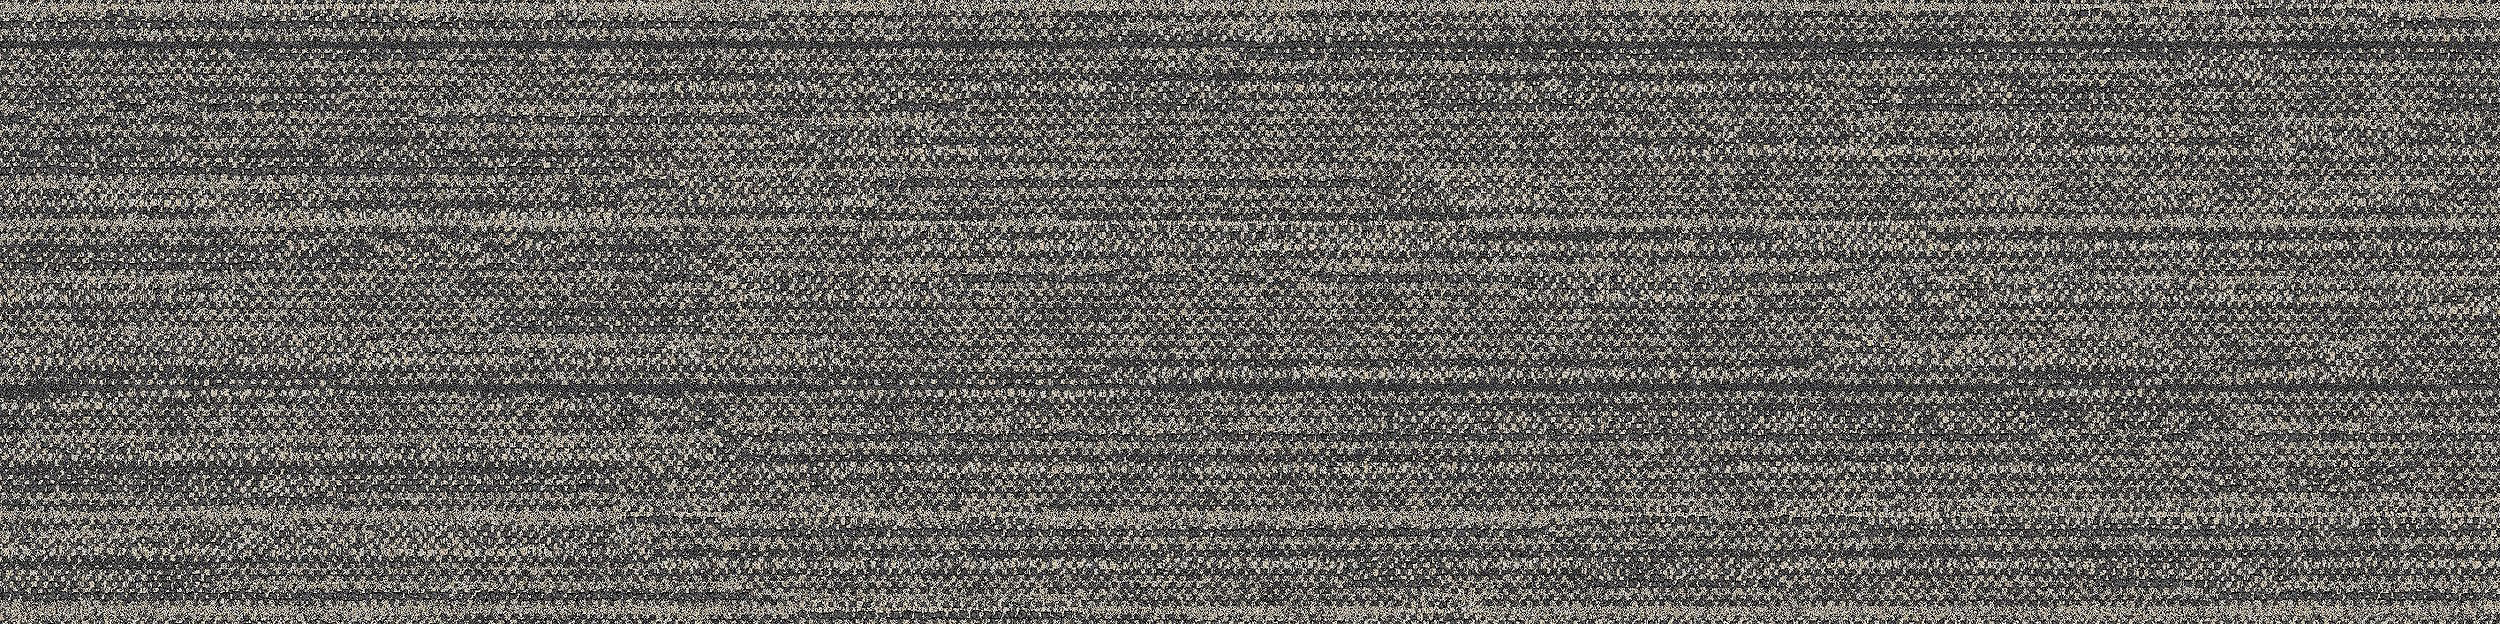 WW880 Carpet Tile In Charcoal Loom image number 8